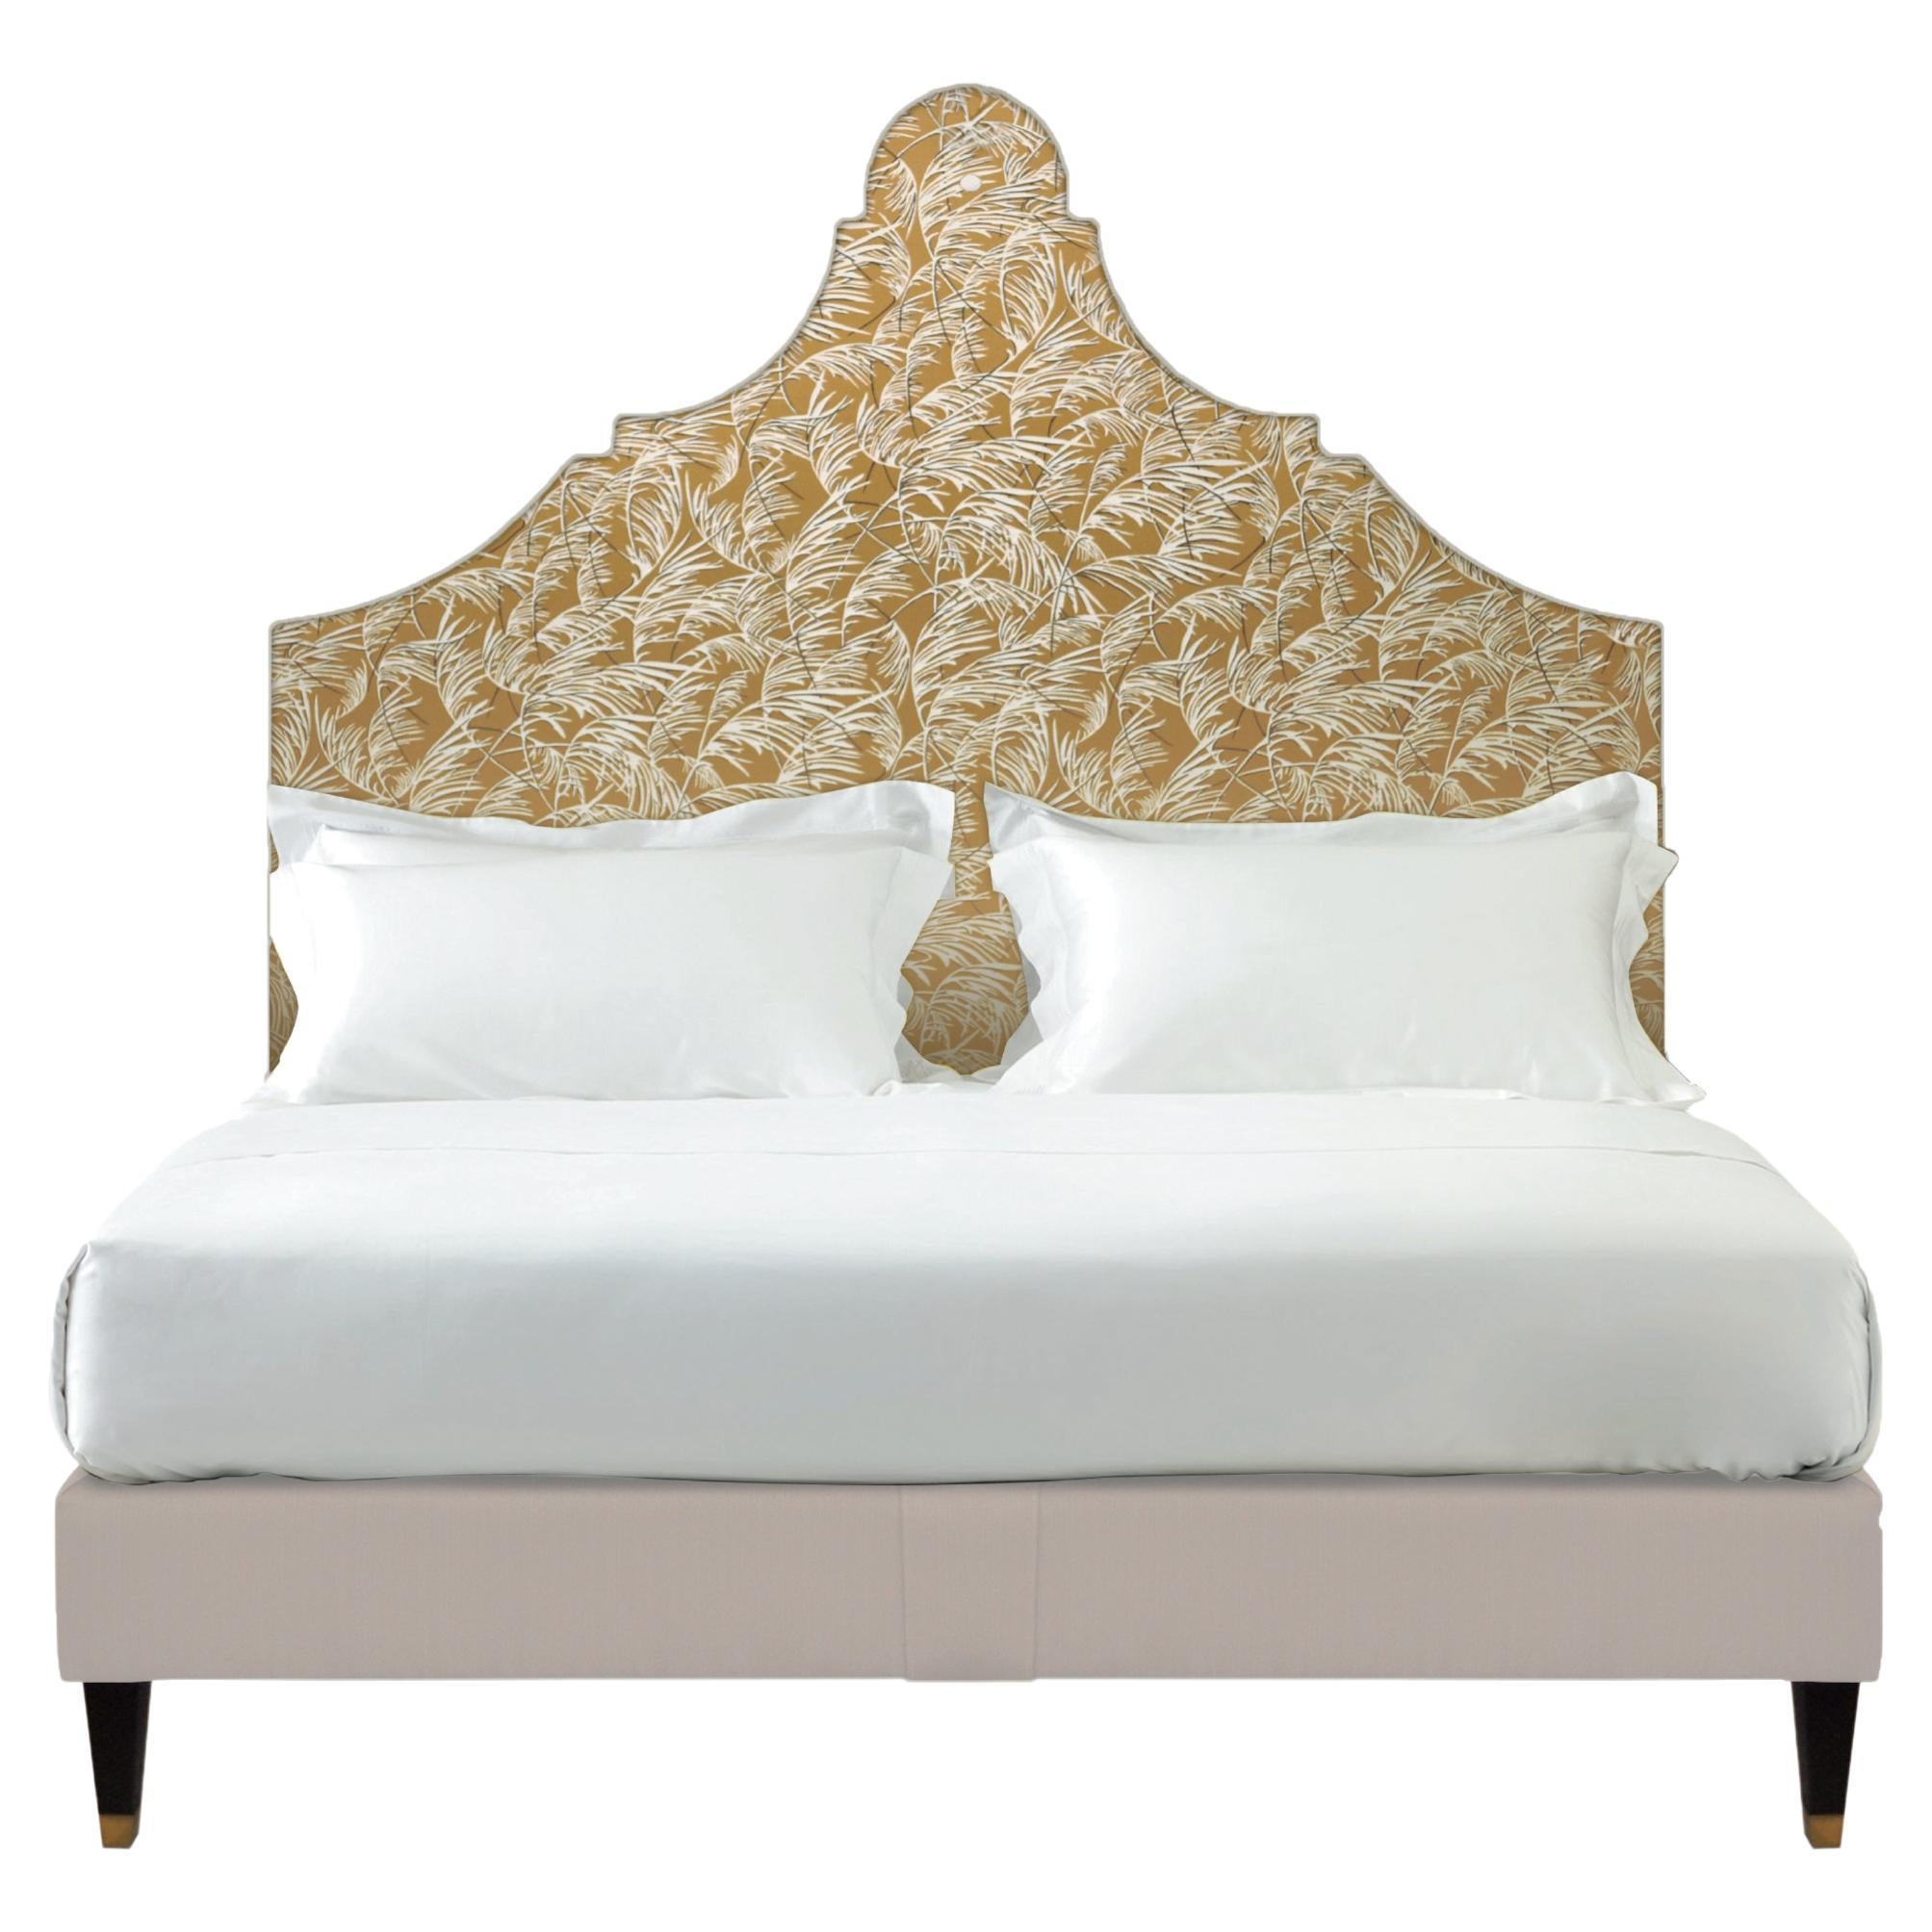 Savoir Rococo Inspired Patterned Headboard with Piping and Nº3 Bed Set, US King For Sale